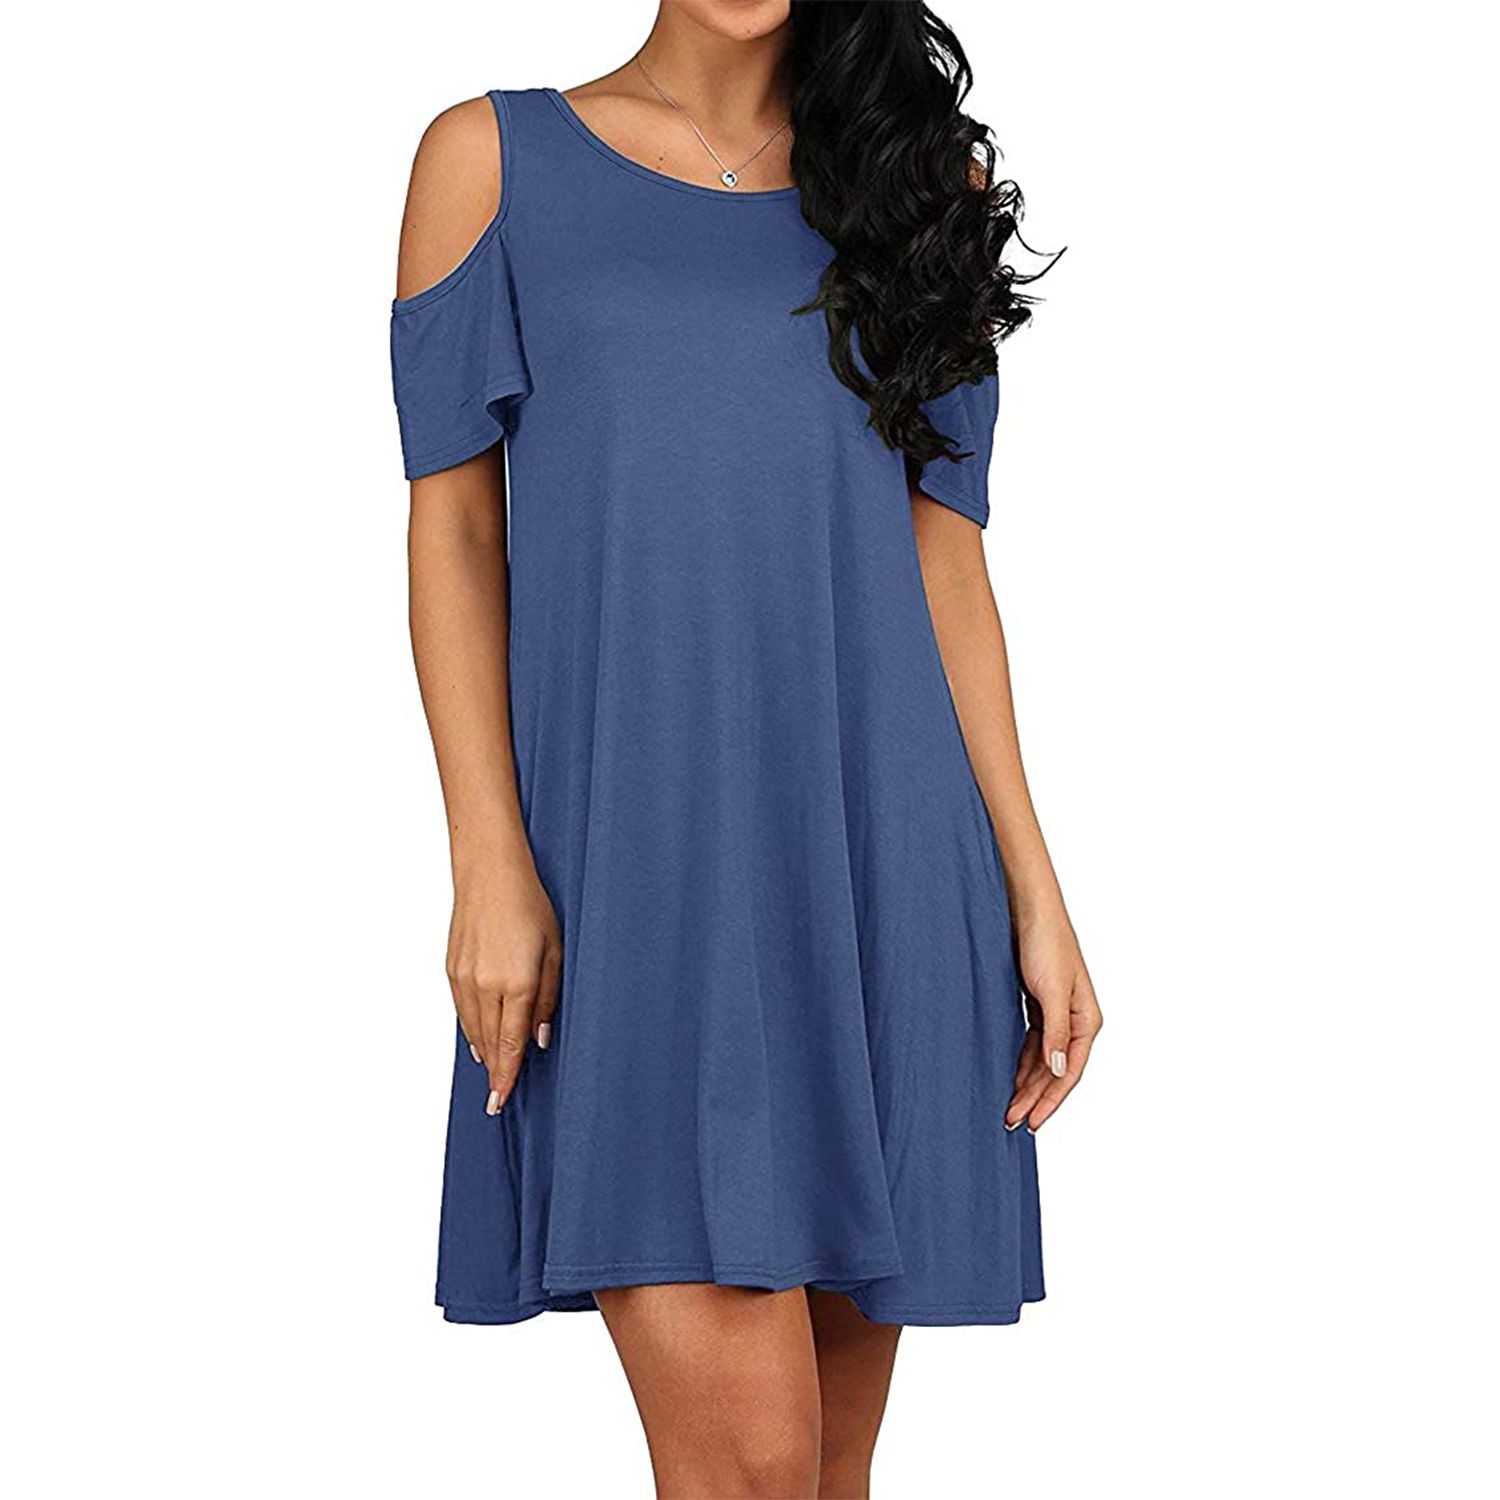 Amazon Shoppers Are So Obsessed with This $22 Dress, They Want to Wear ...